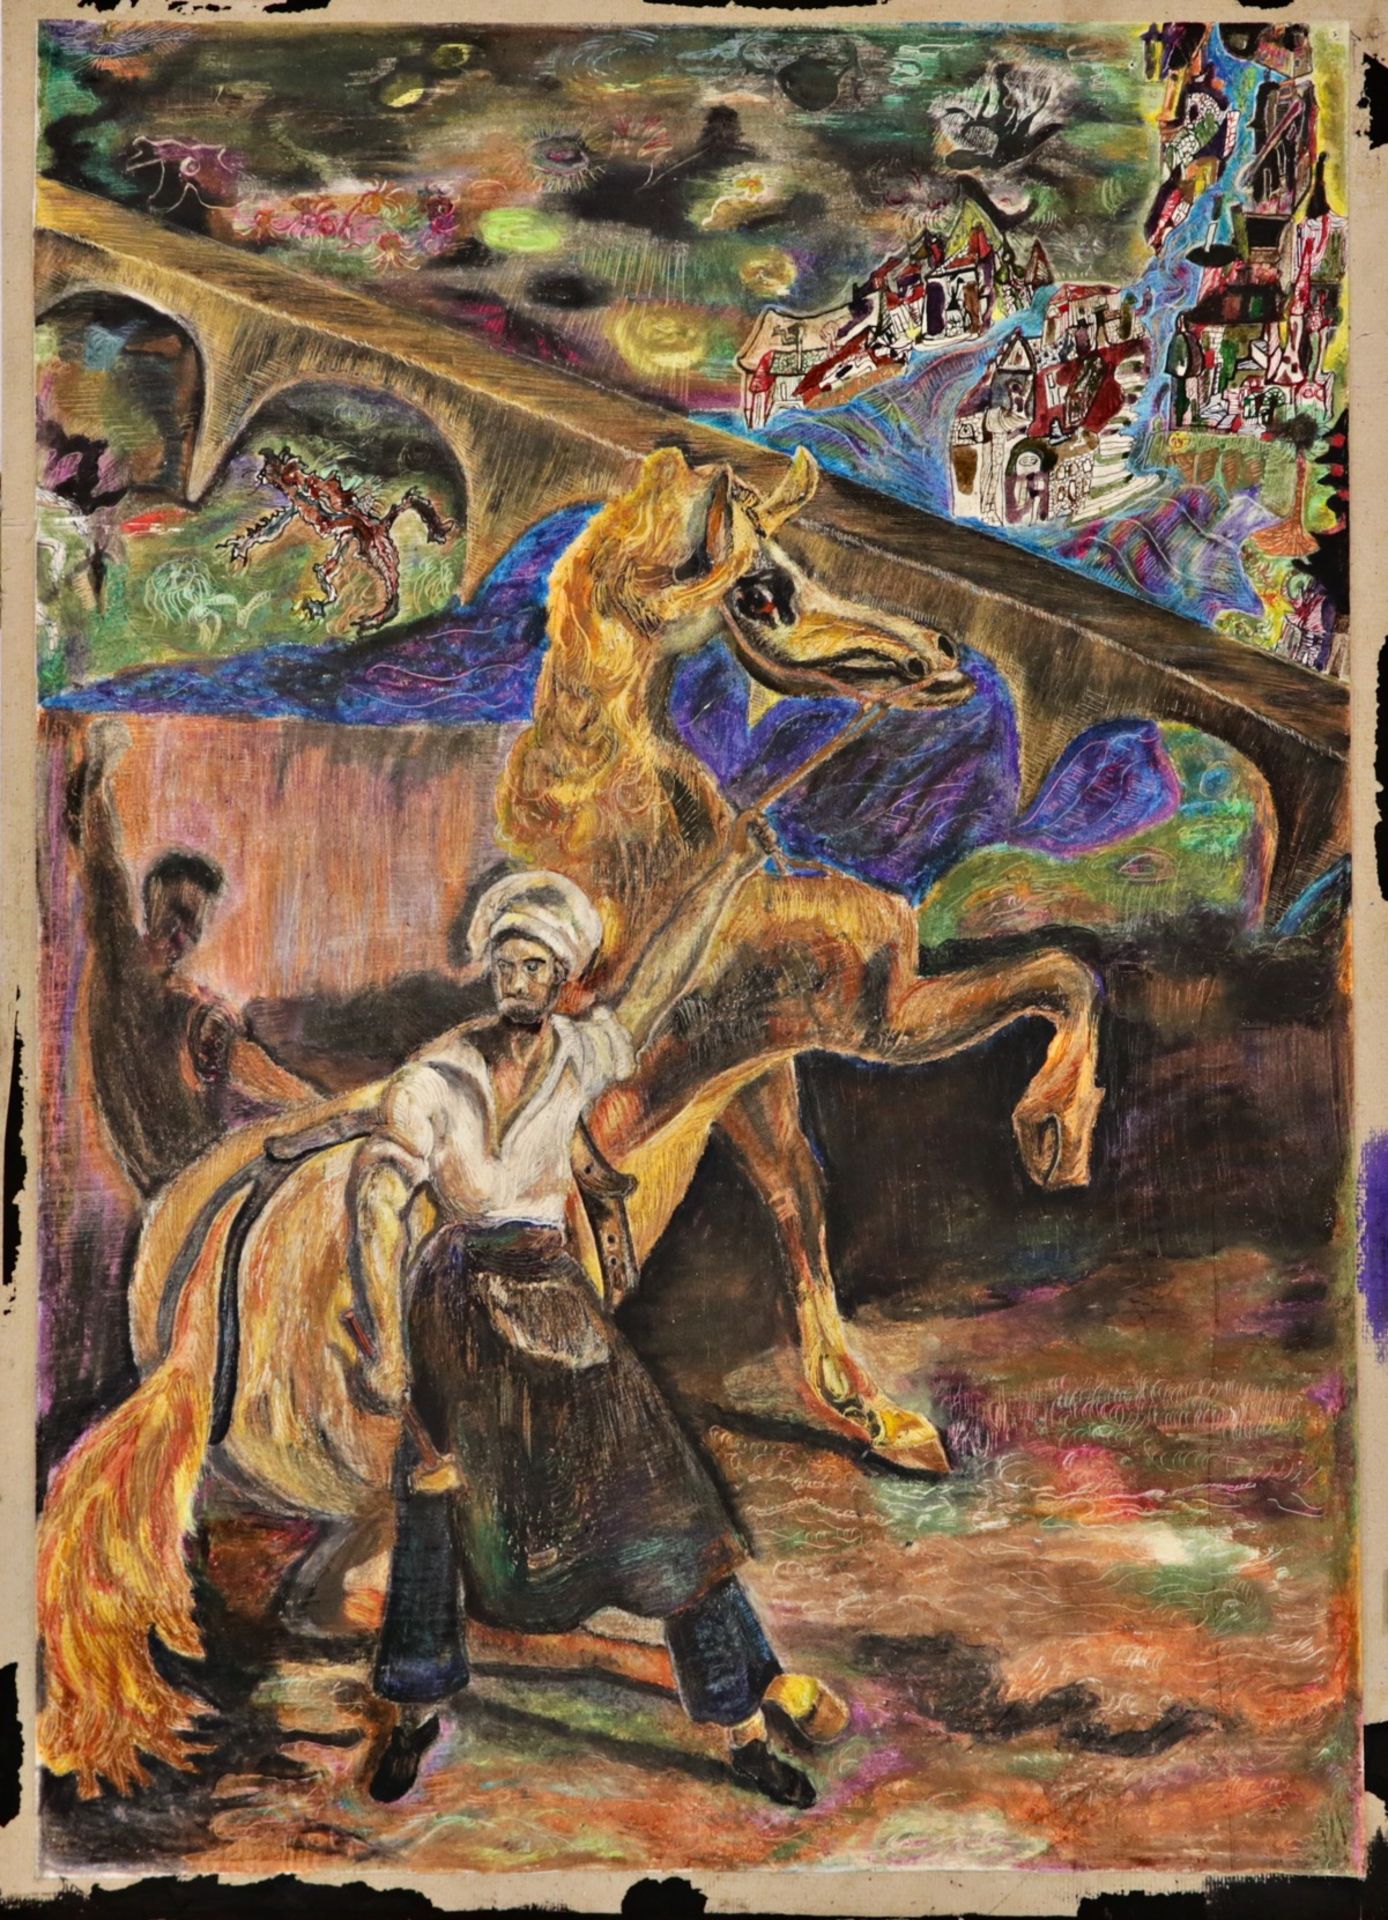 "Indian blacksmith and horse", gouache and watercolor, 20th century painting. - Bild 2 aus 4